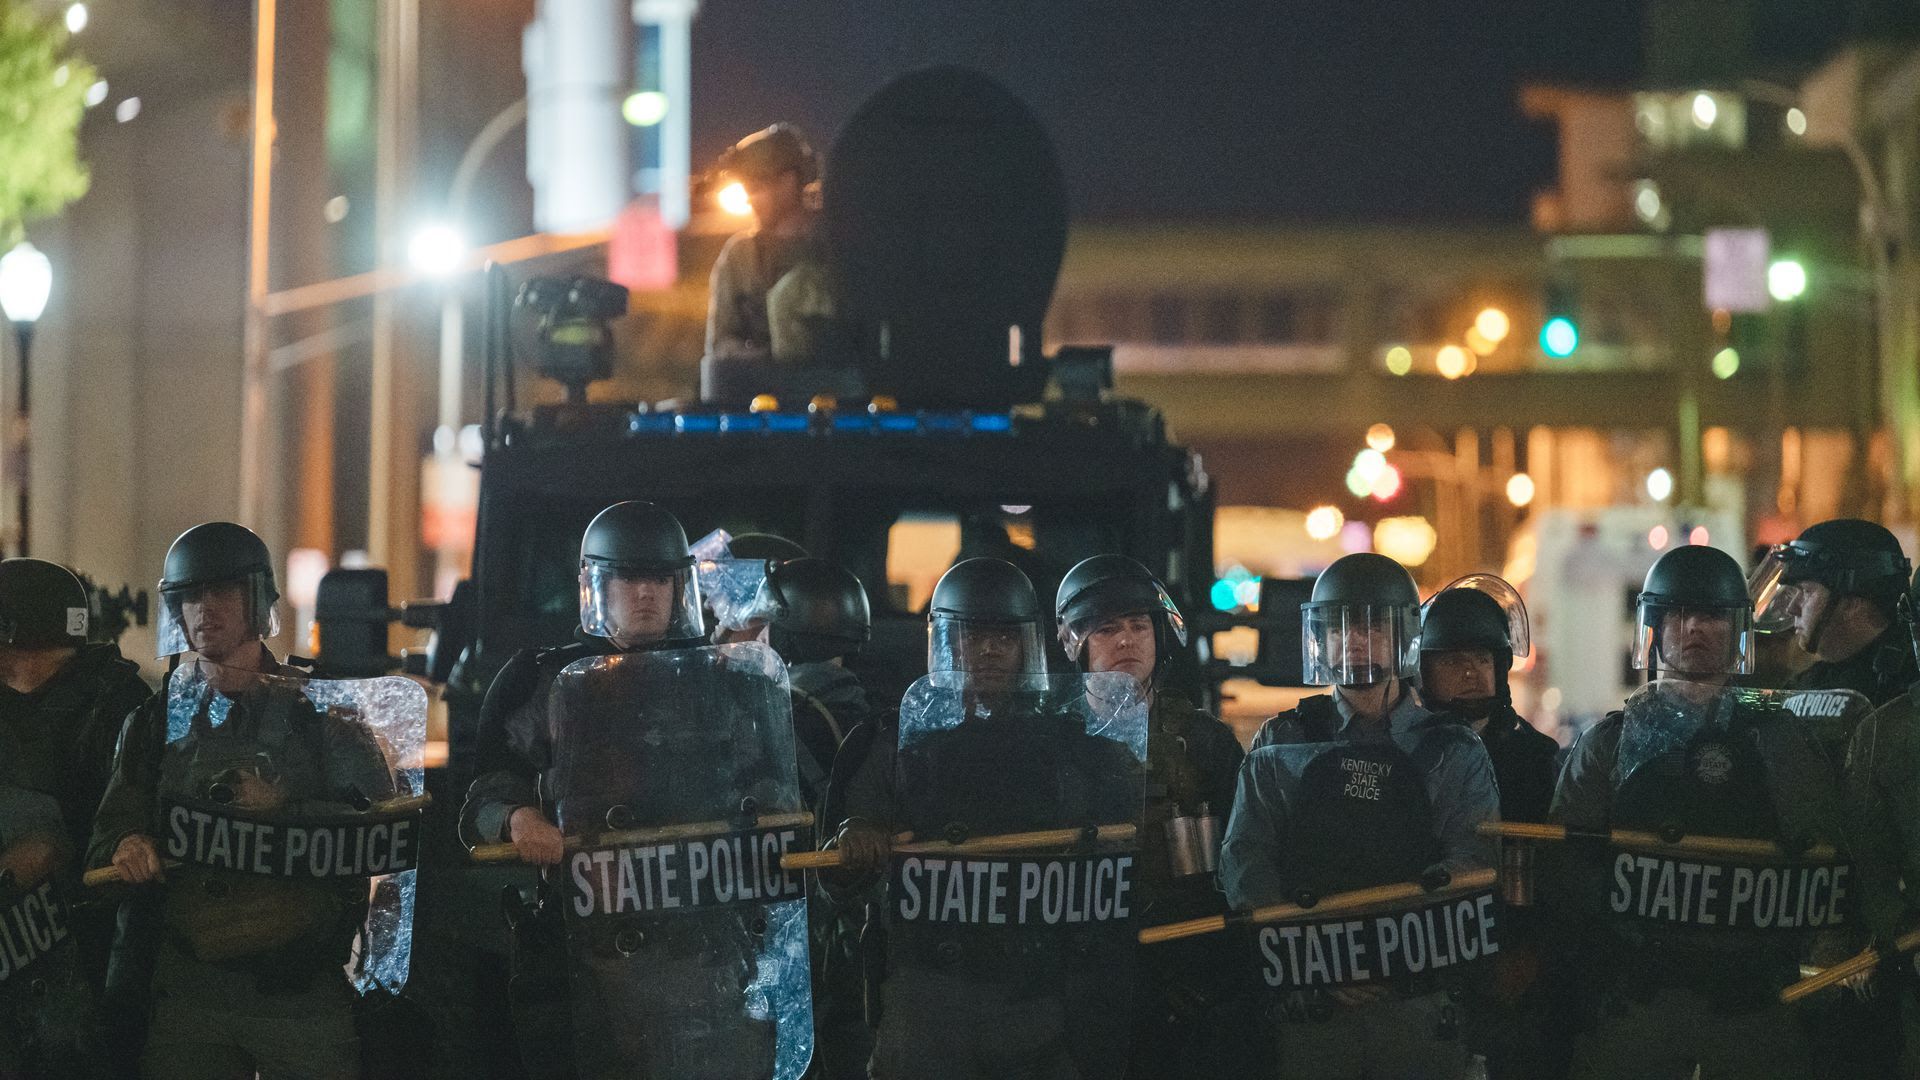 Louisville state police on Wednesday. Photo: Jon Cherry/Getty Images